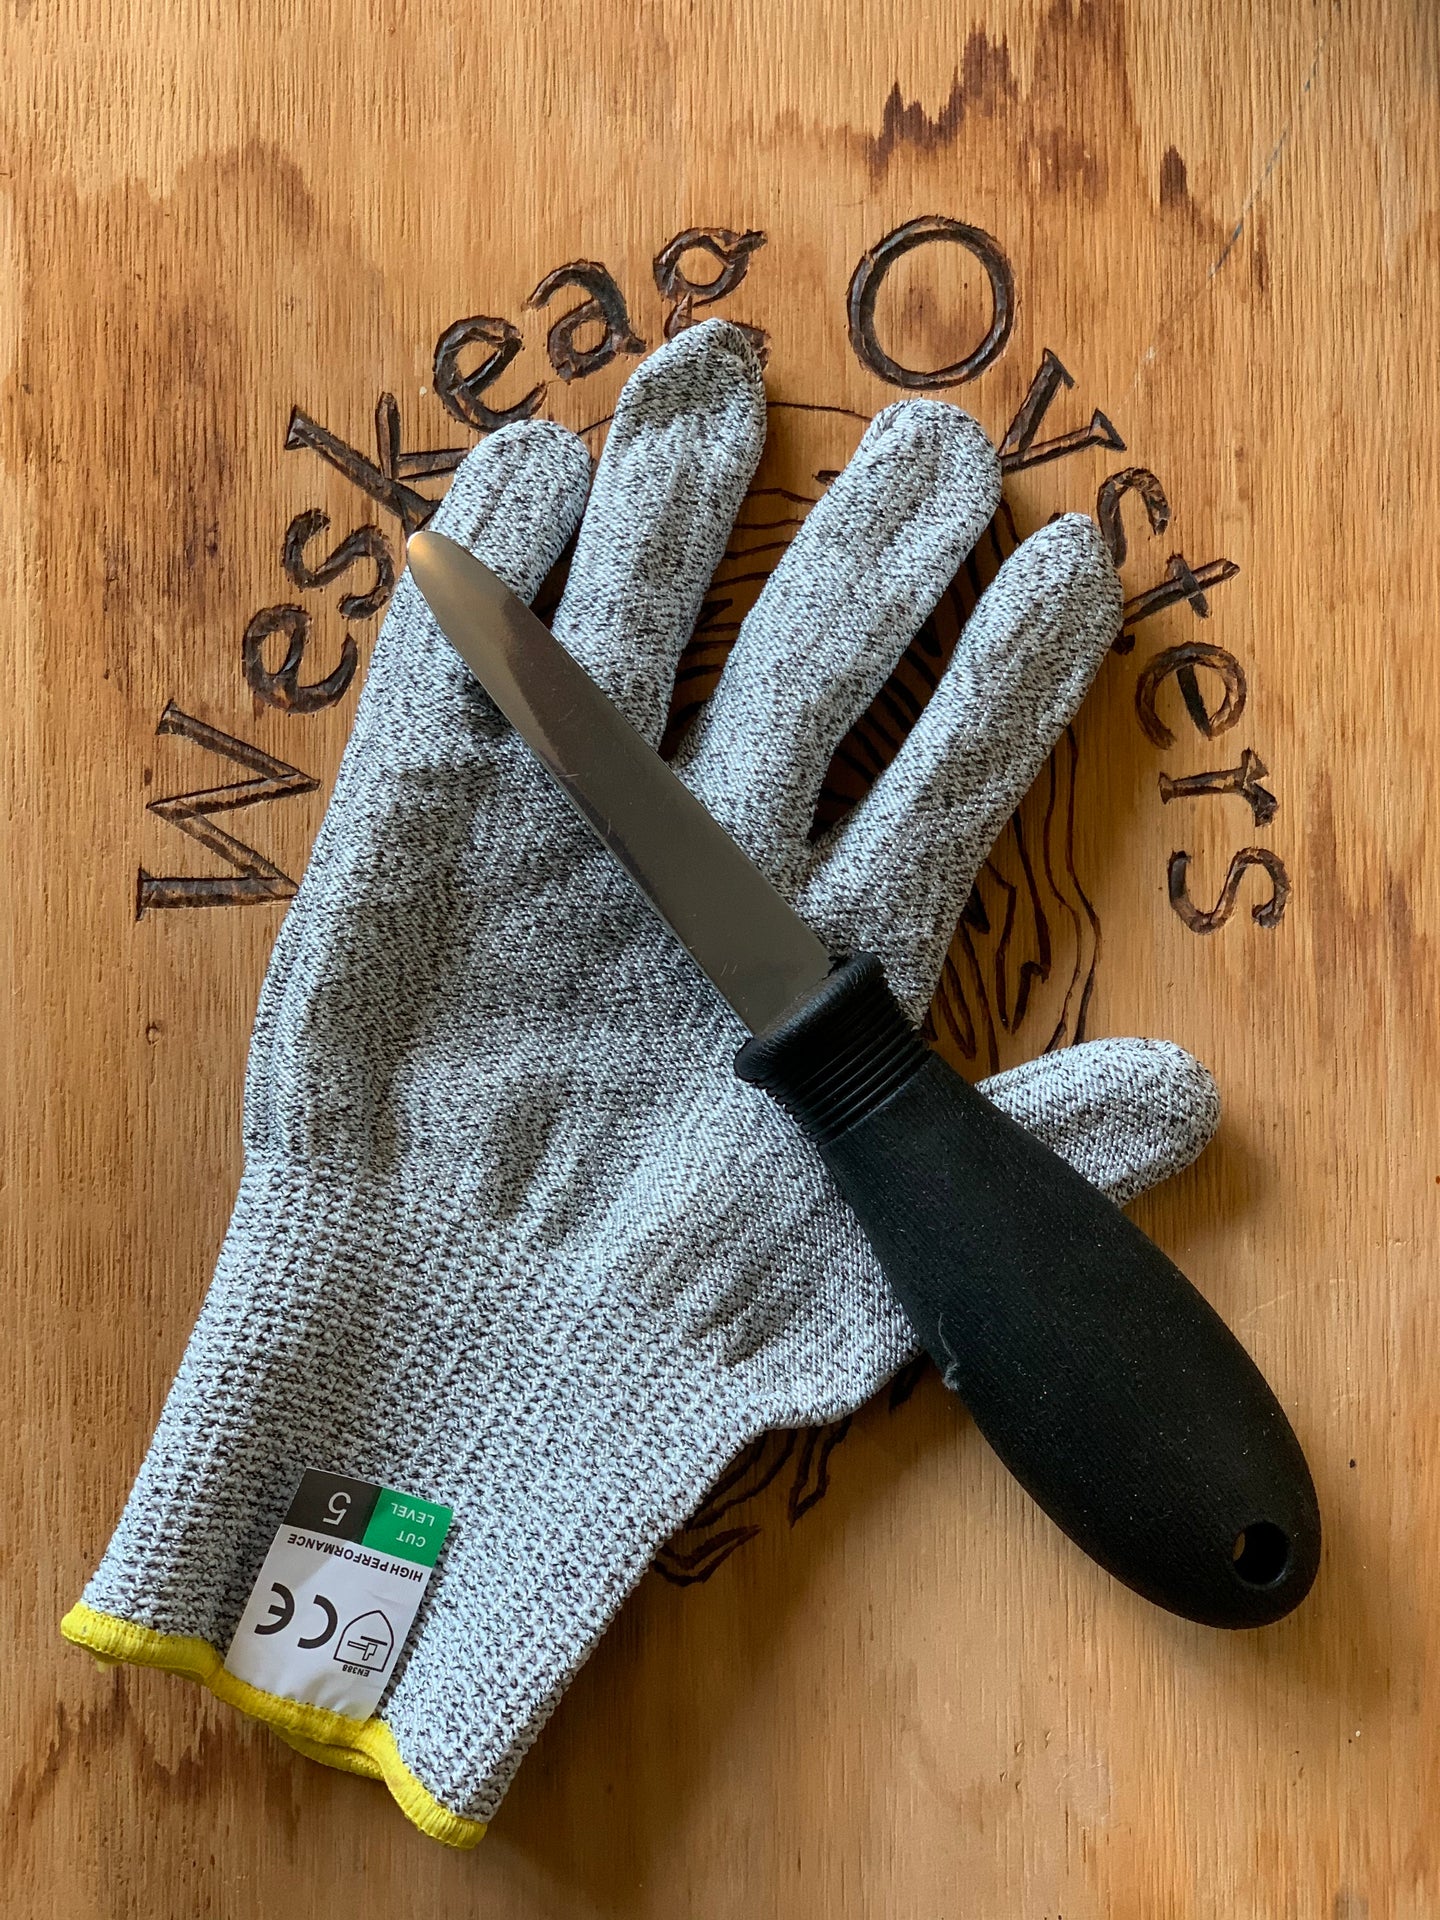 Oyster Shucking Kit- Glove and Knife – WESKEAG Oyster Company